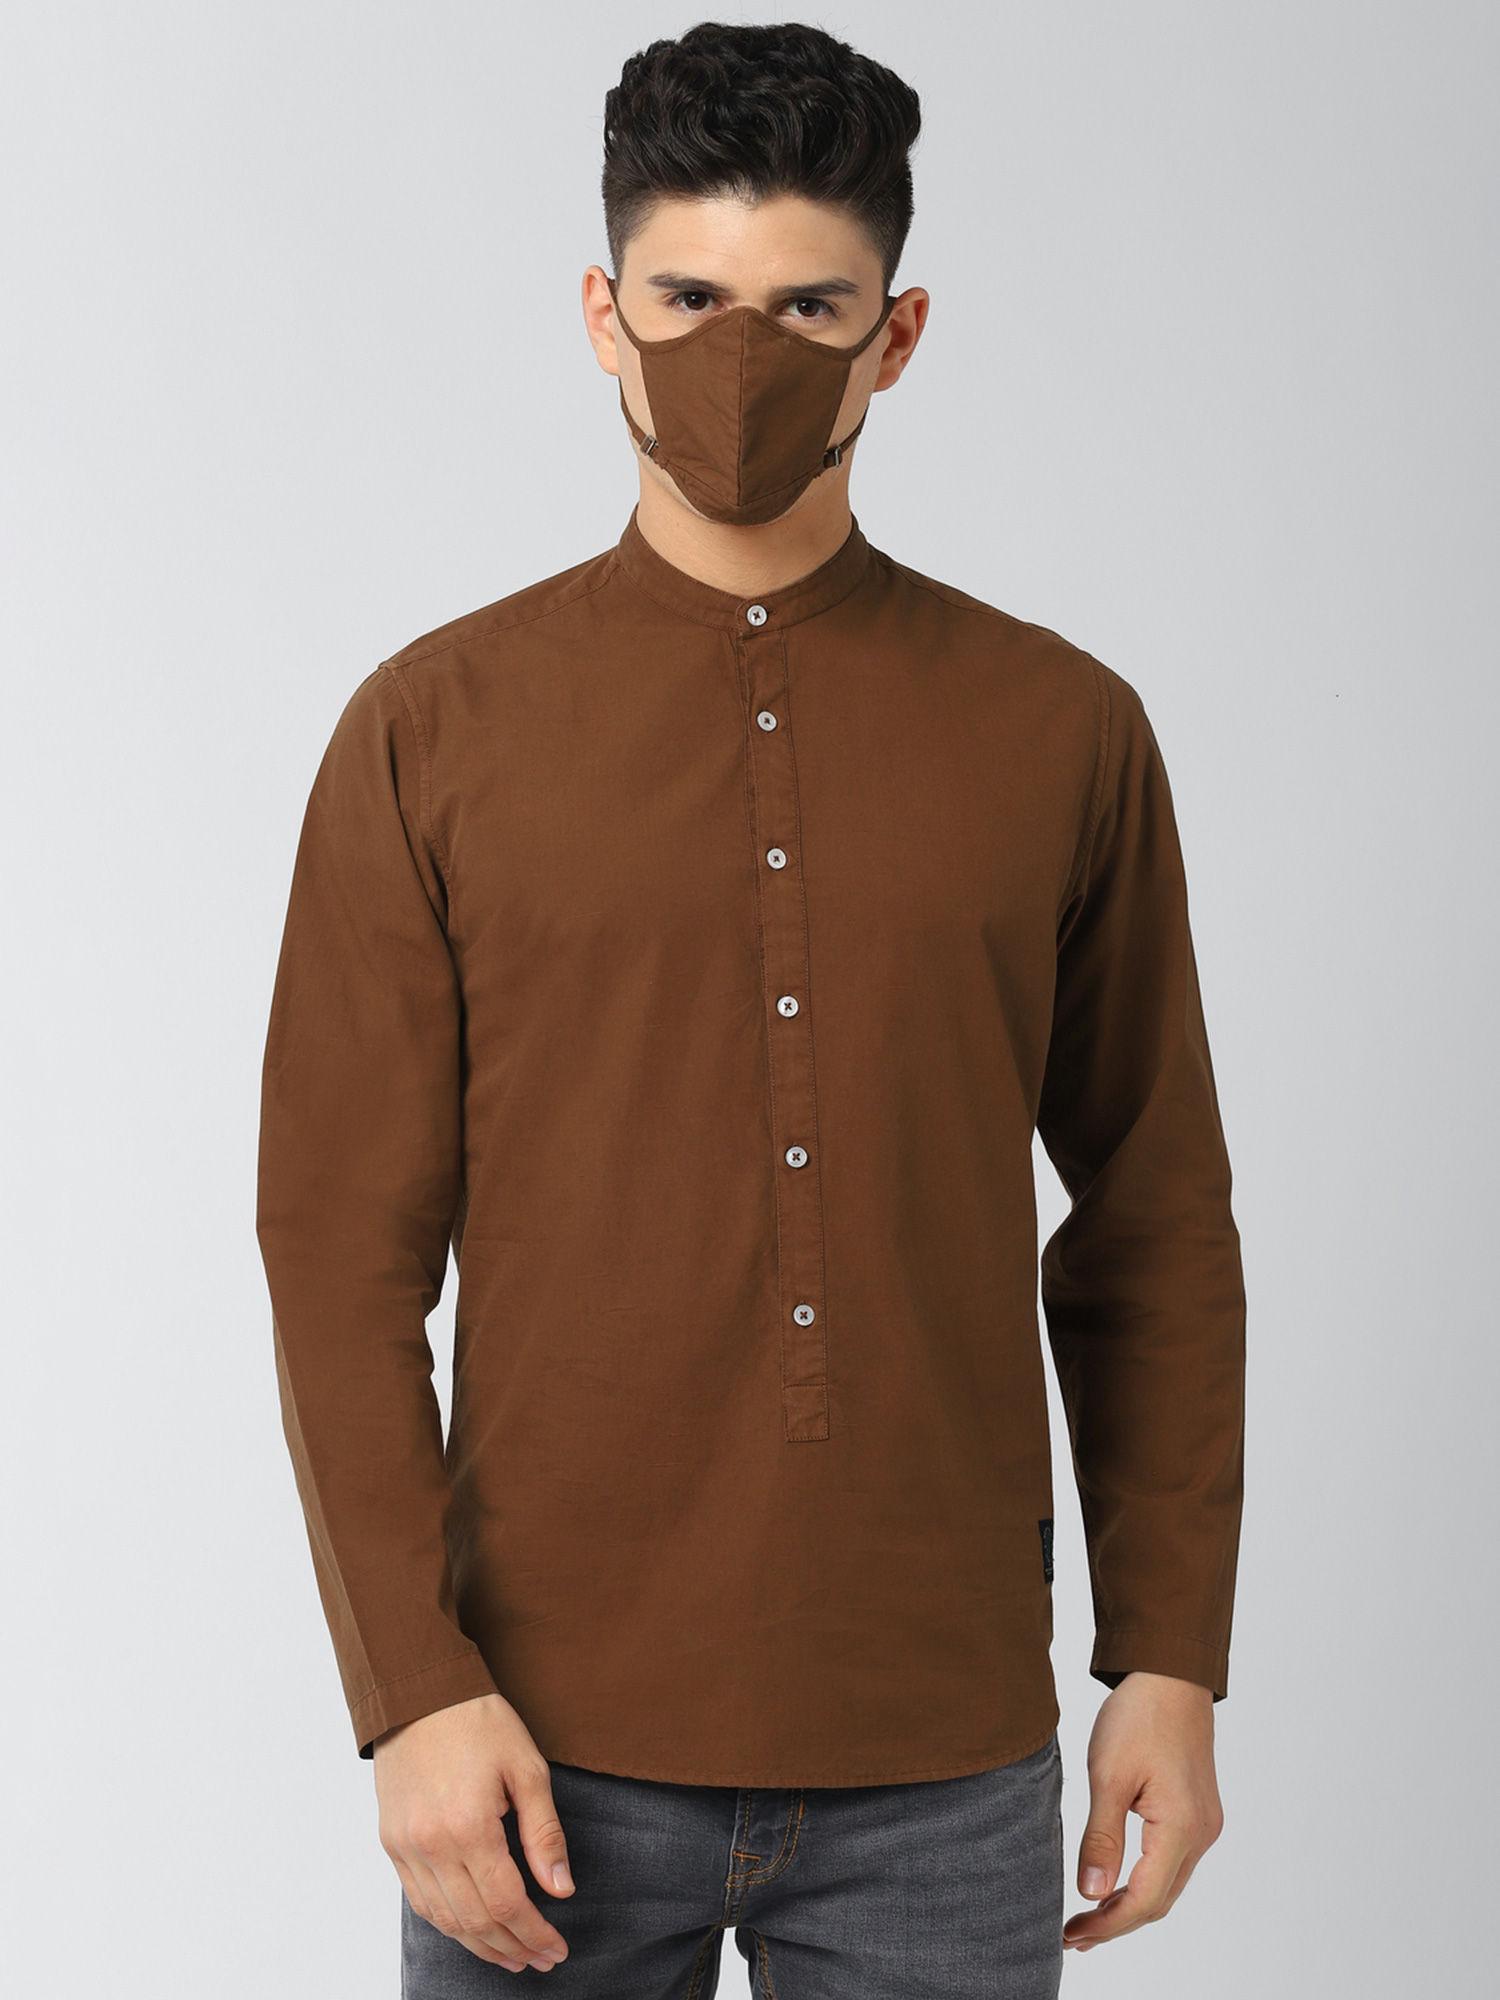 peter england brown full sleeves casual shirt